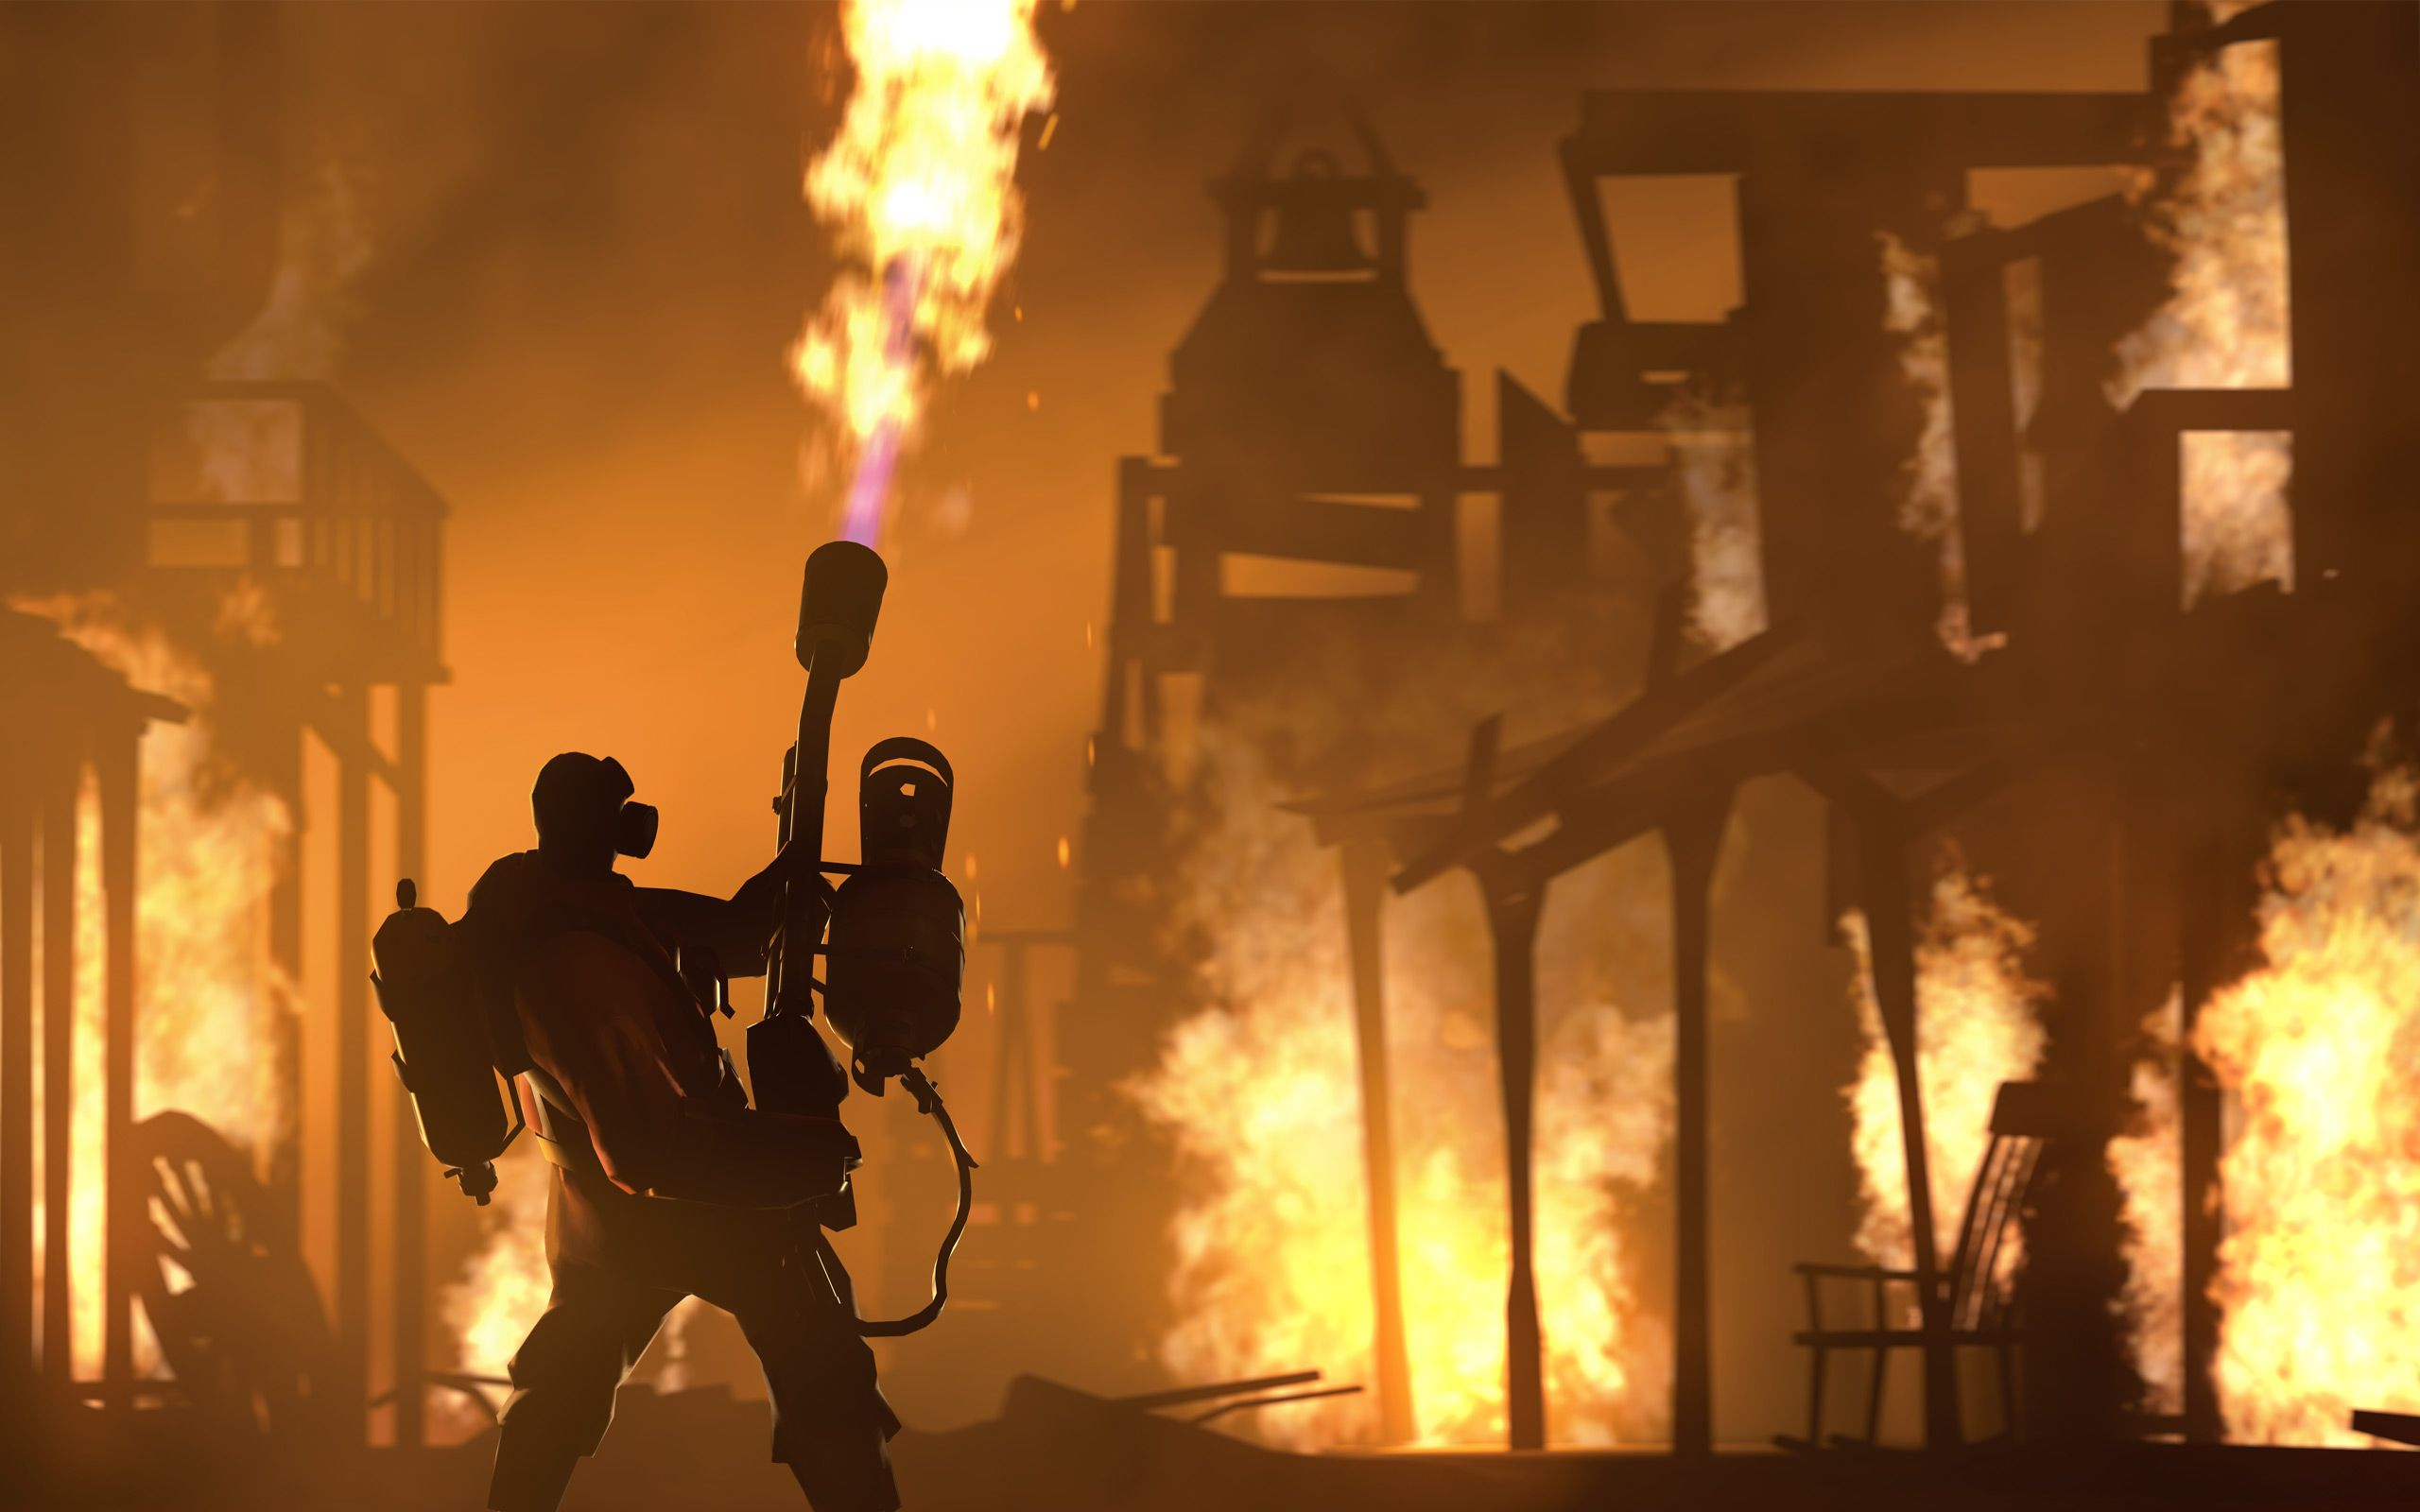 2560x1600 Burn Baby Burn. Pyromania by TF2 | Fortress game, Team fortress, Wallpaper